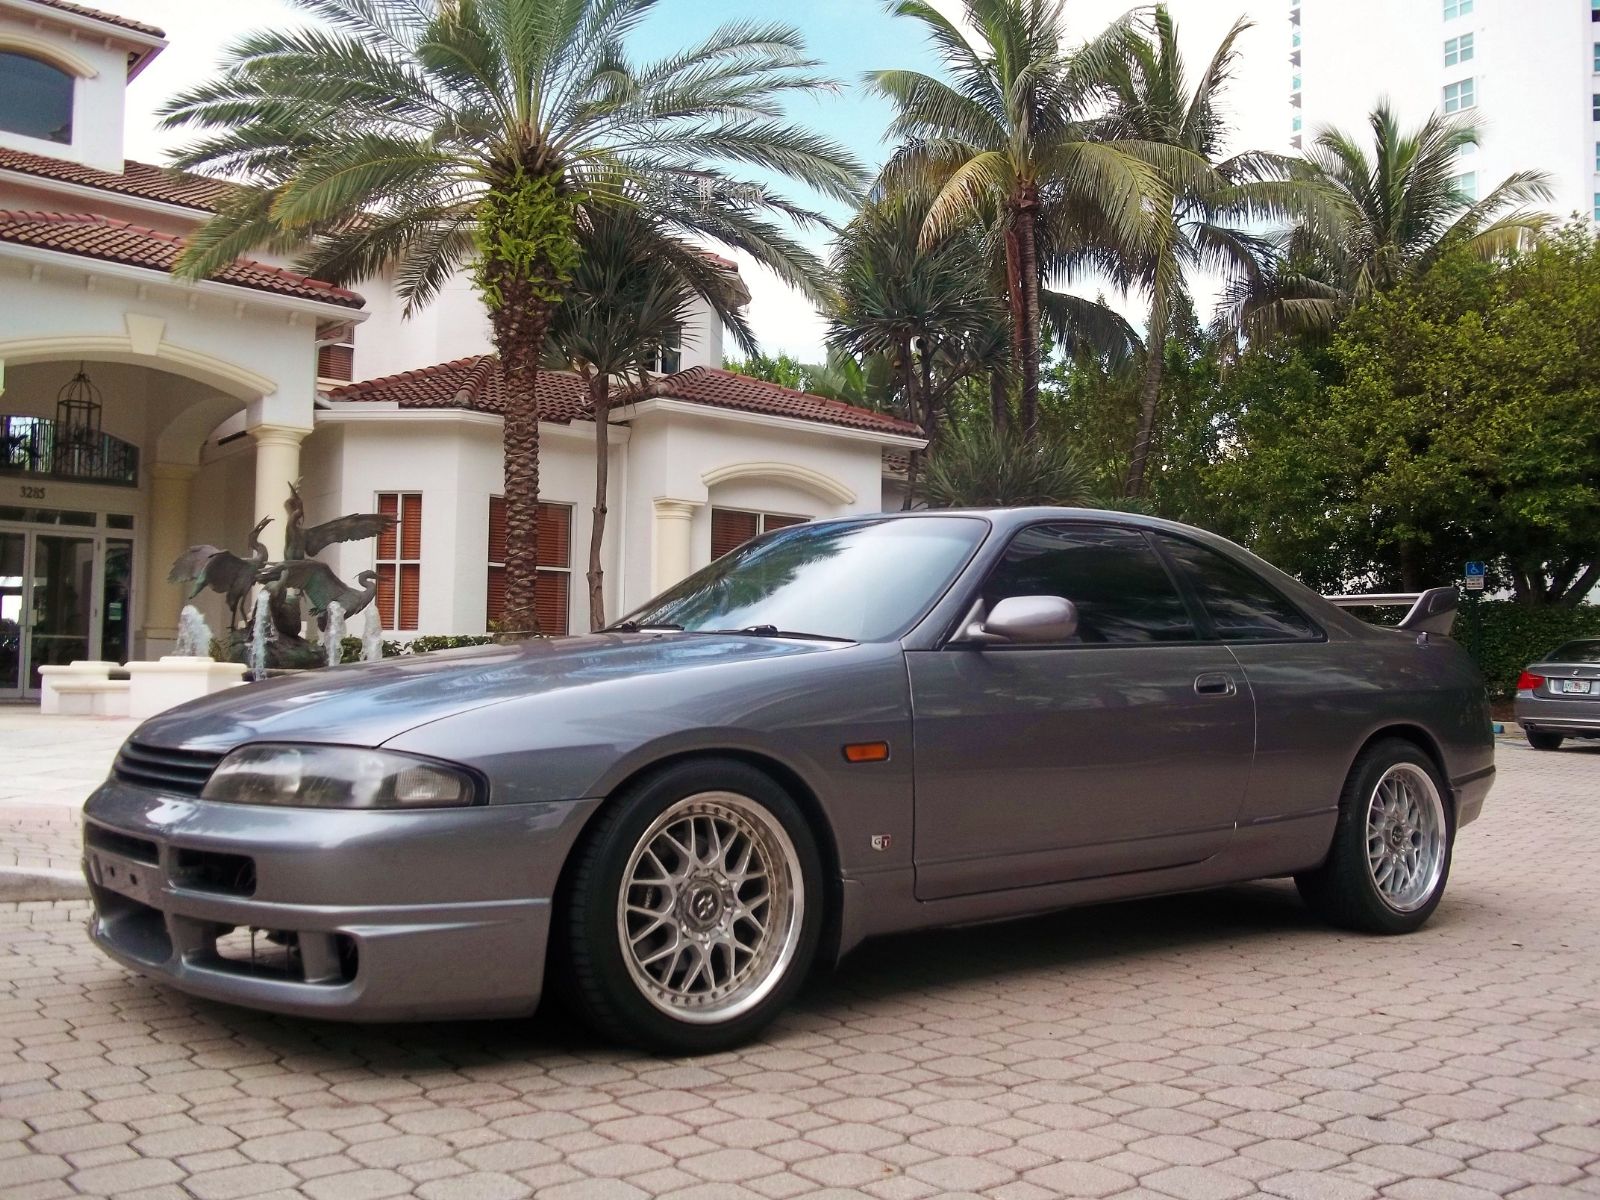 Nissan skyline for sale in south florida #4